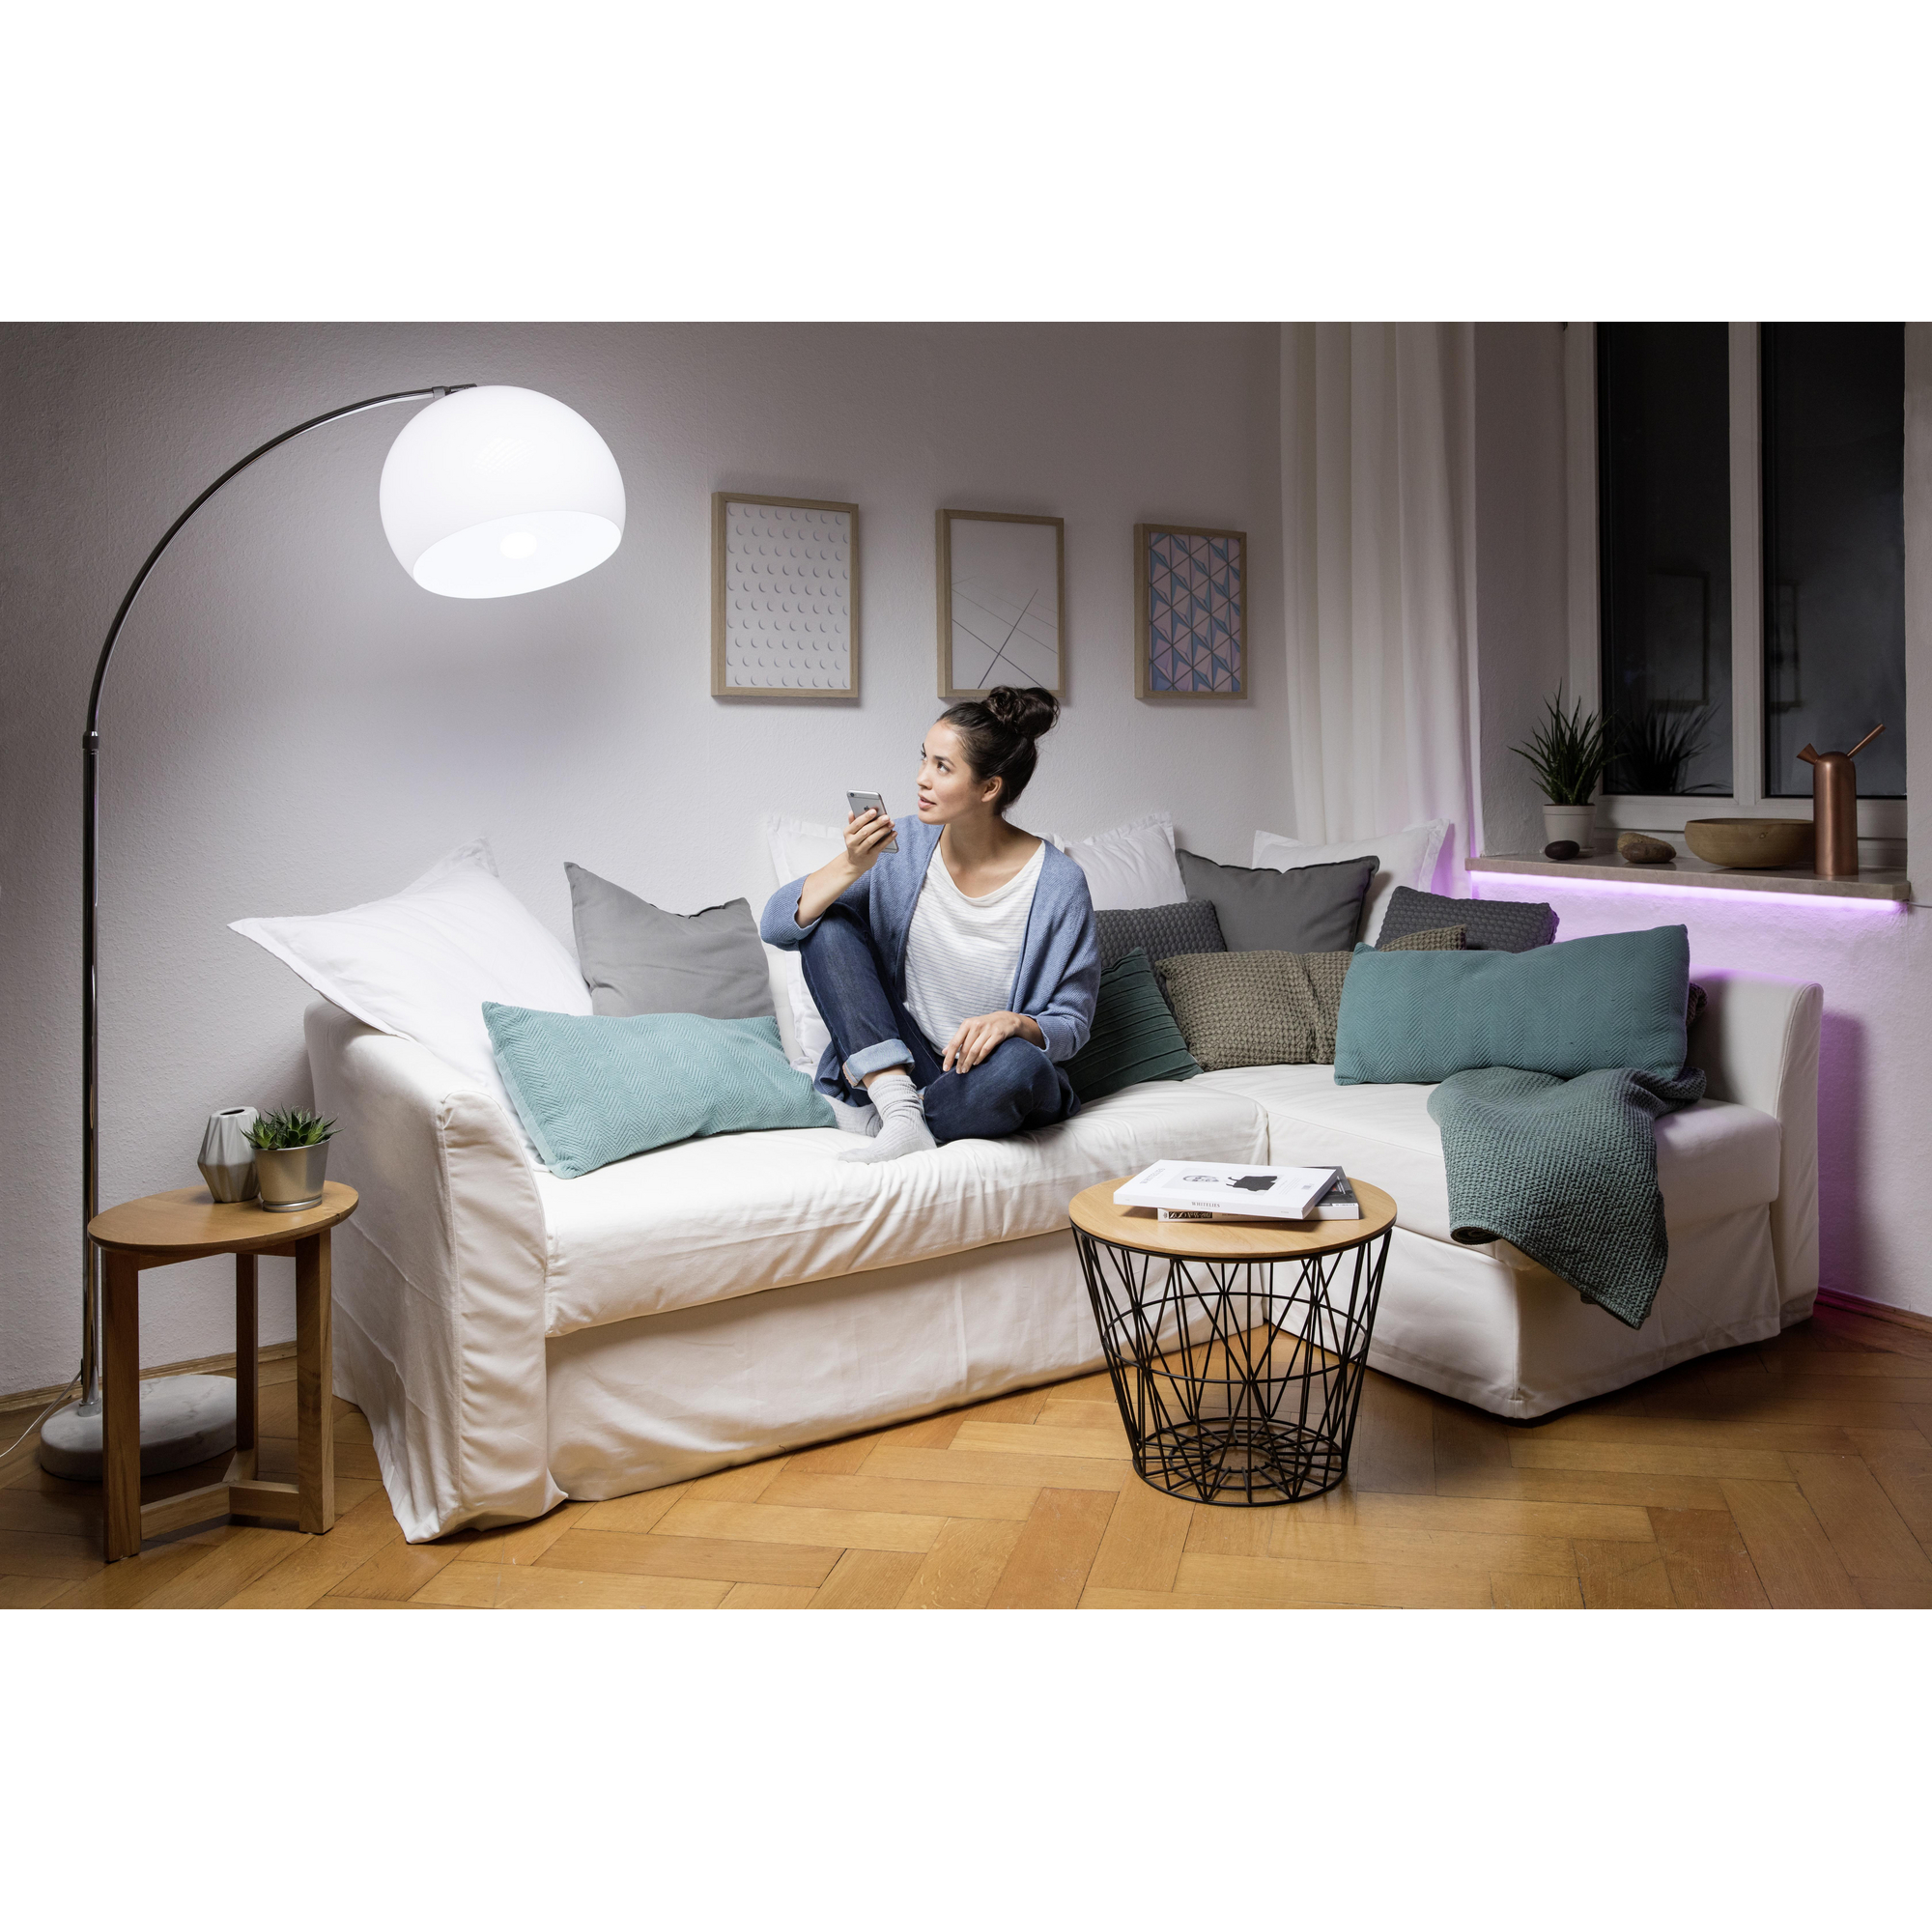 LED-RBW-Lampe 'Smart+' 11,5 cm 806 lm 9 W E14 weiß Bluetooth + product picture